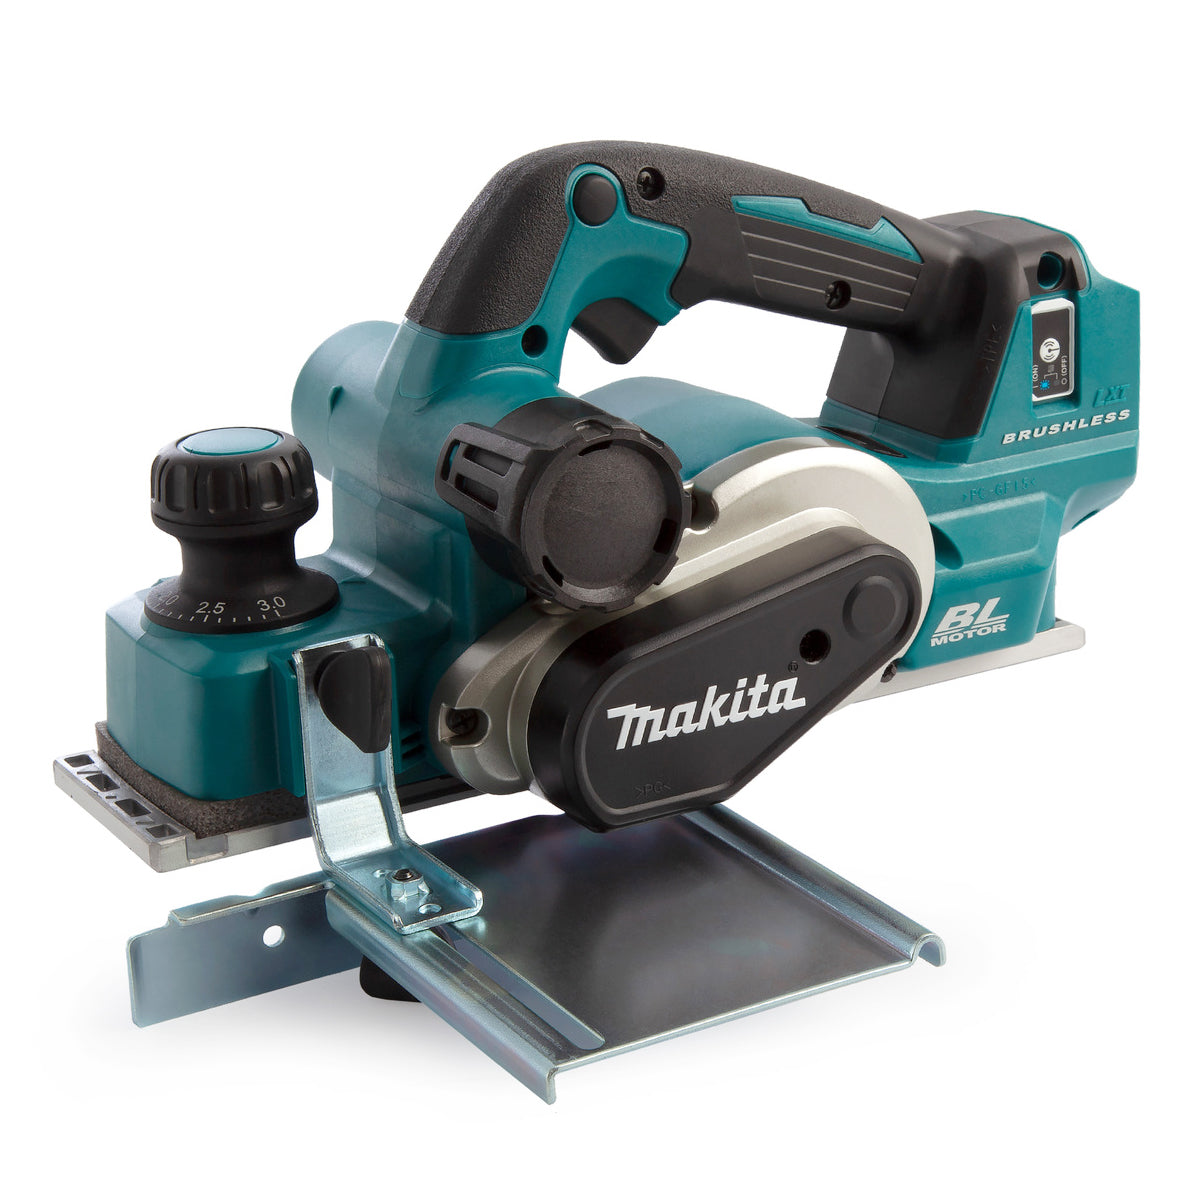 Makita DKP181RTJ 18V LXT Brushless Planer with 2 x 5.0Ah Batteries Charger & Case